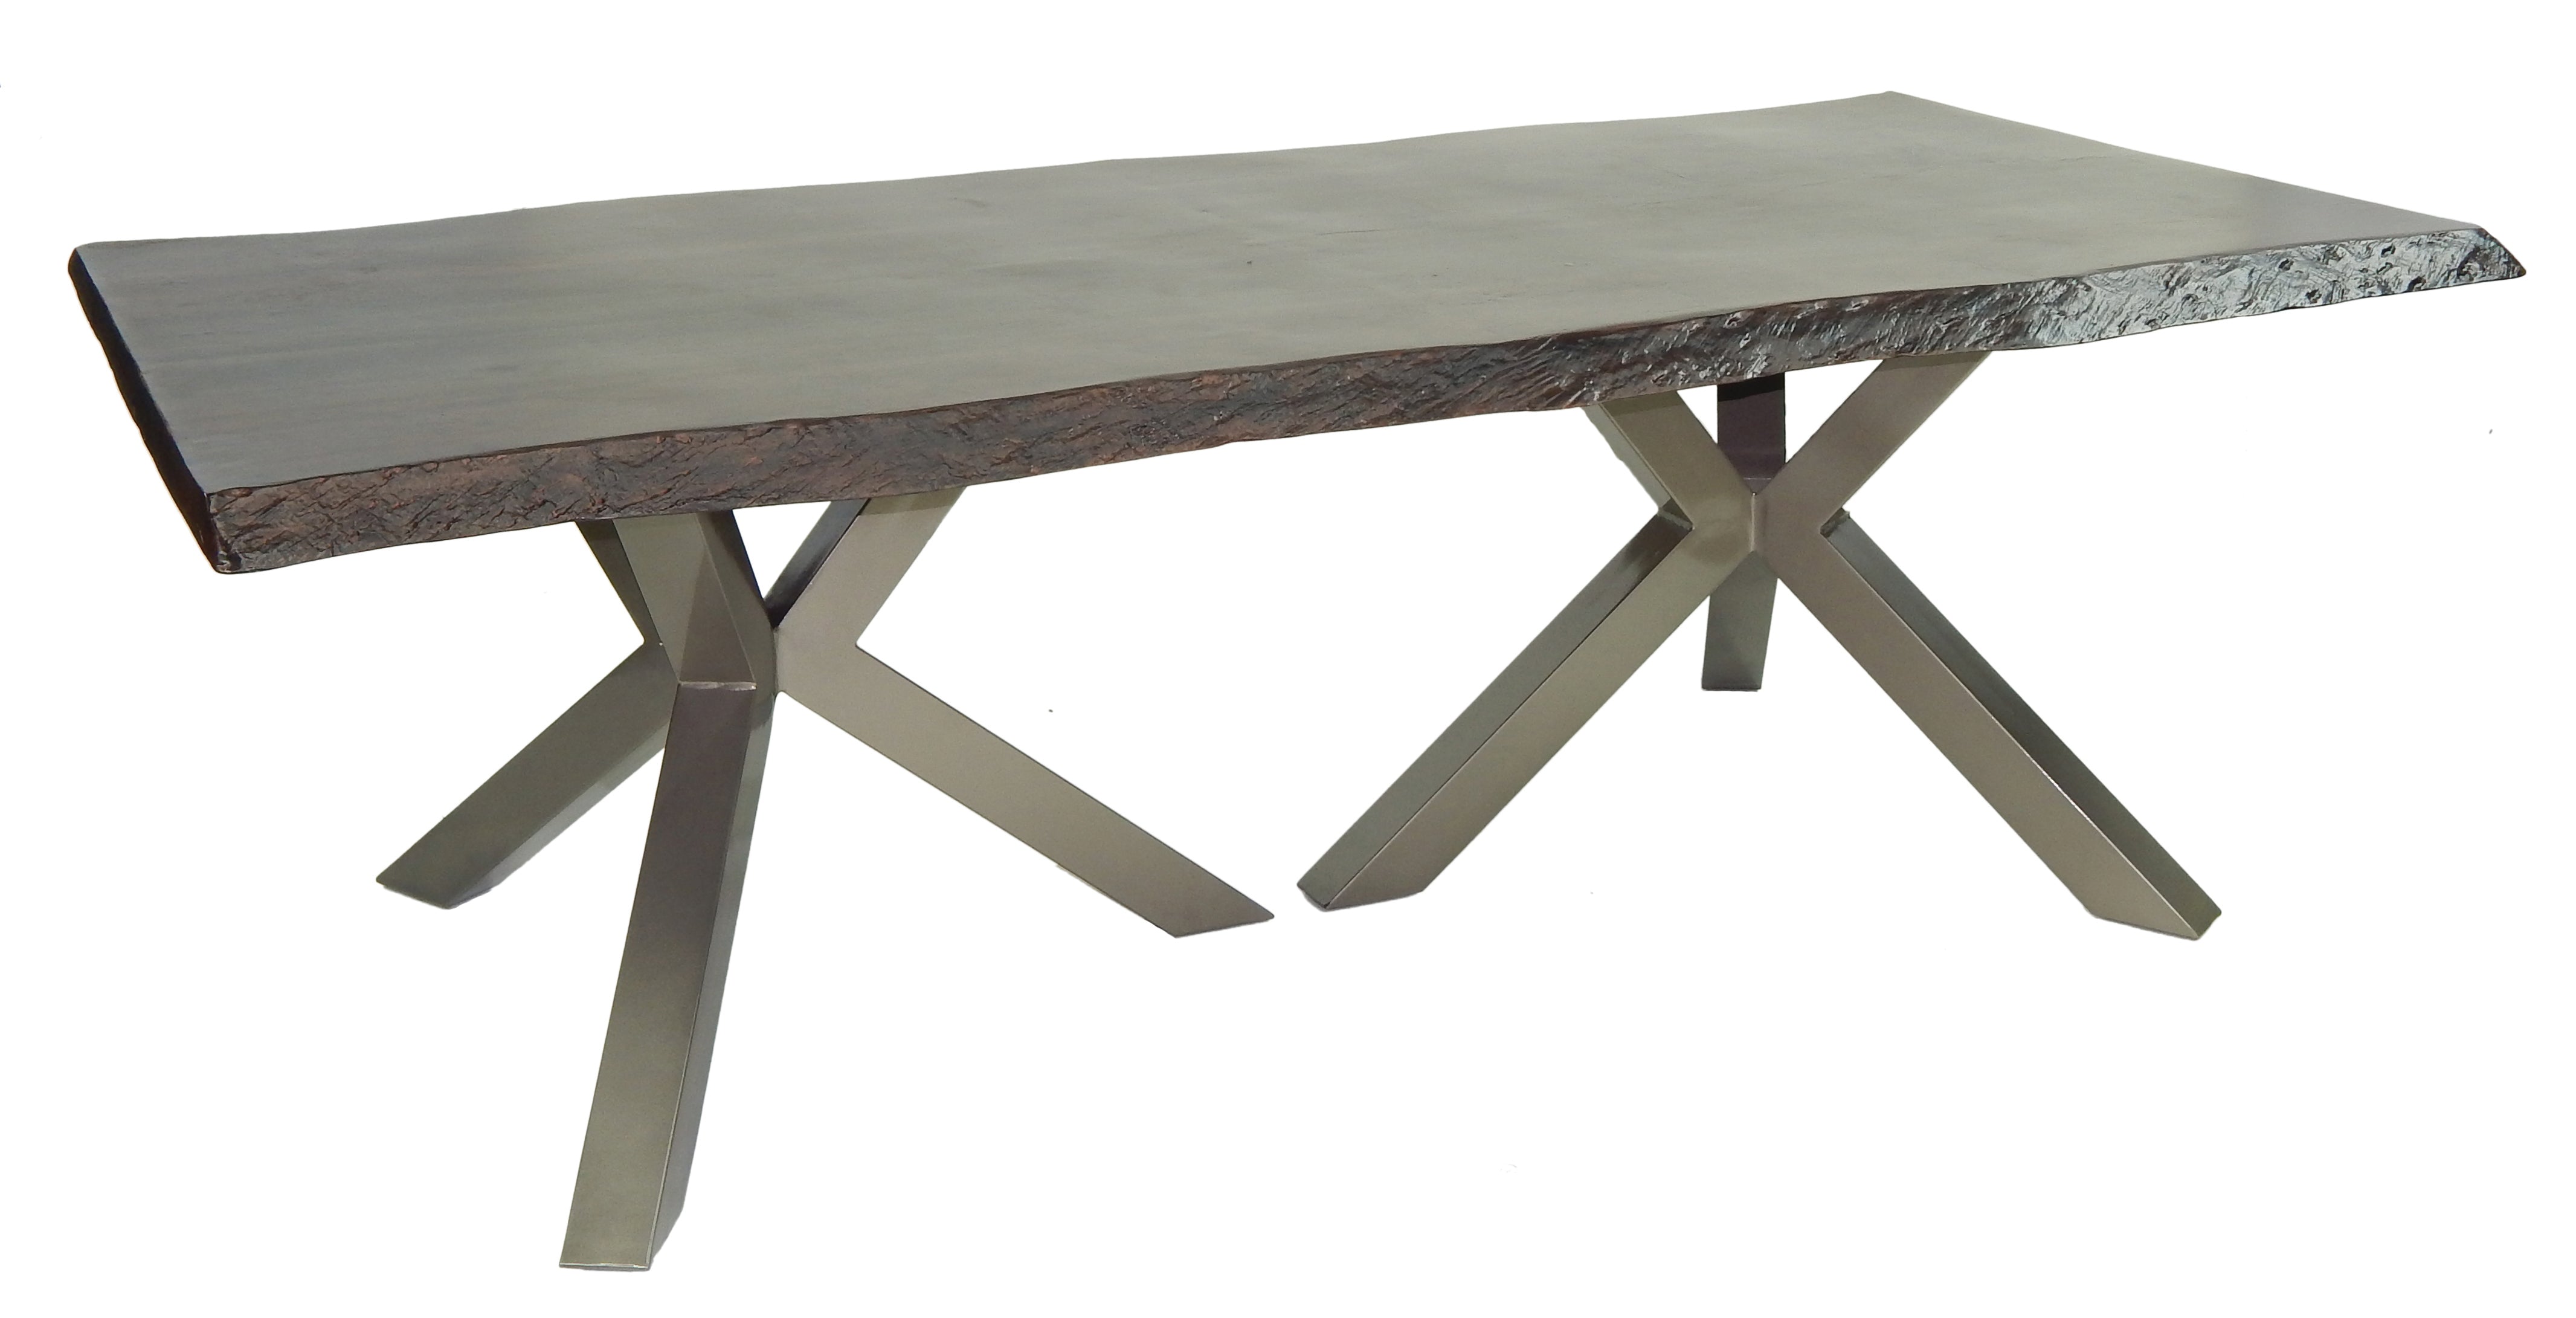 Altra 44" x 86" Rectangle Dining Table By Castelle